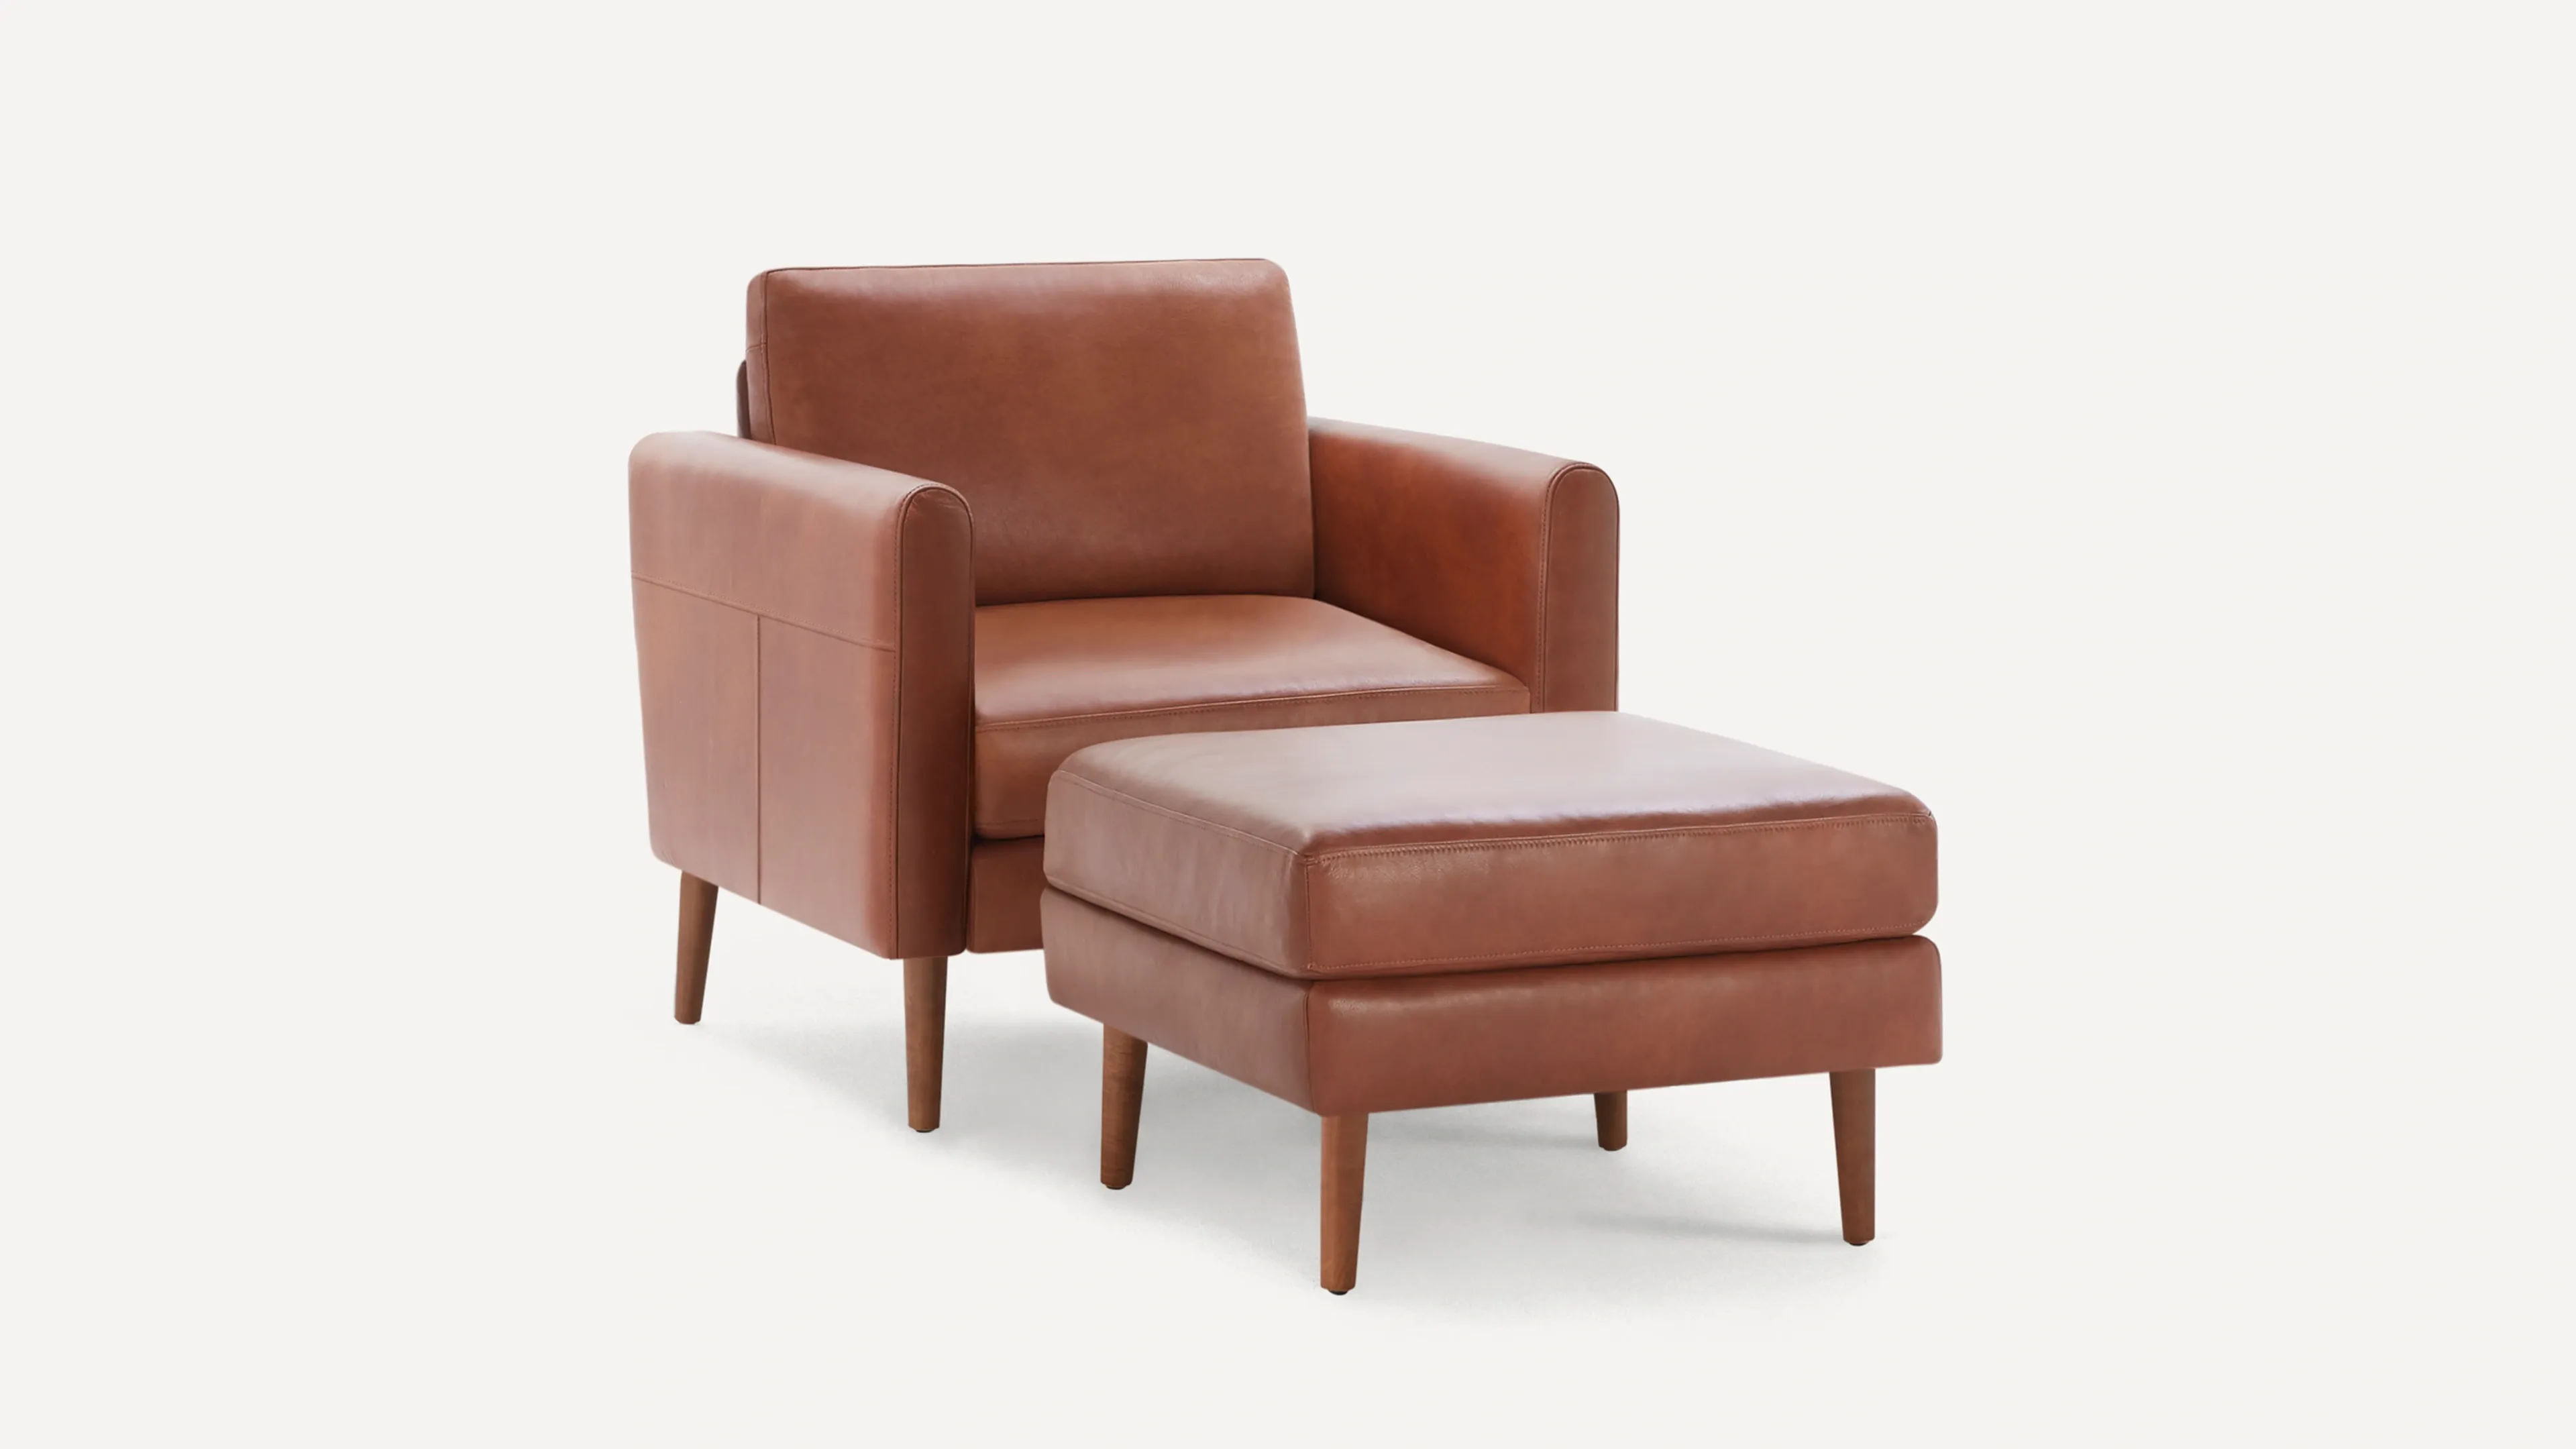 Original Nomad Armchair with Ottoman in Chestnut Leather